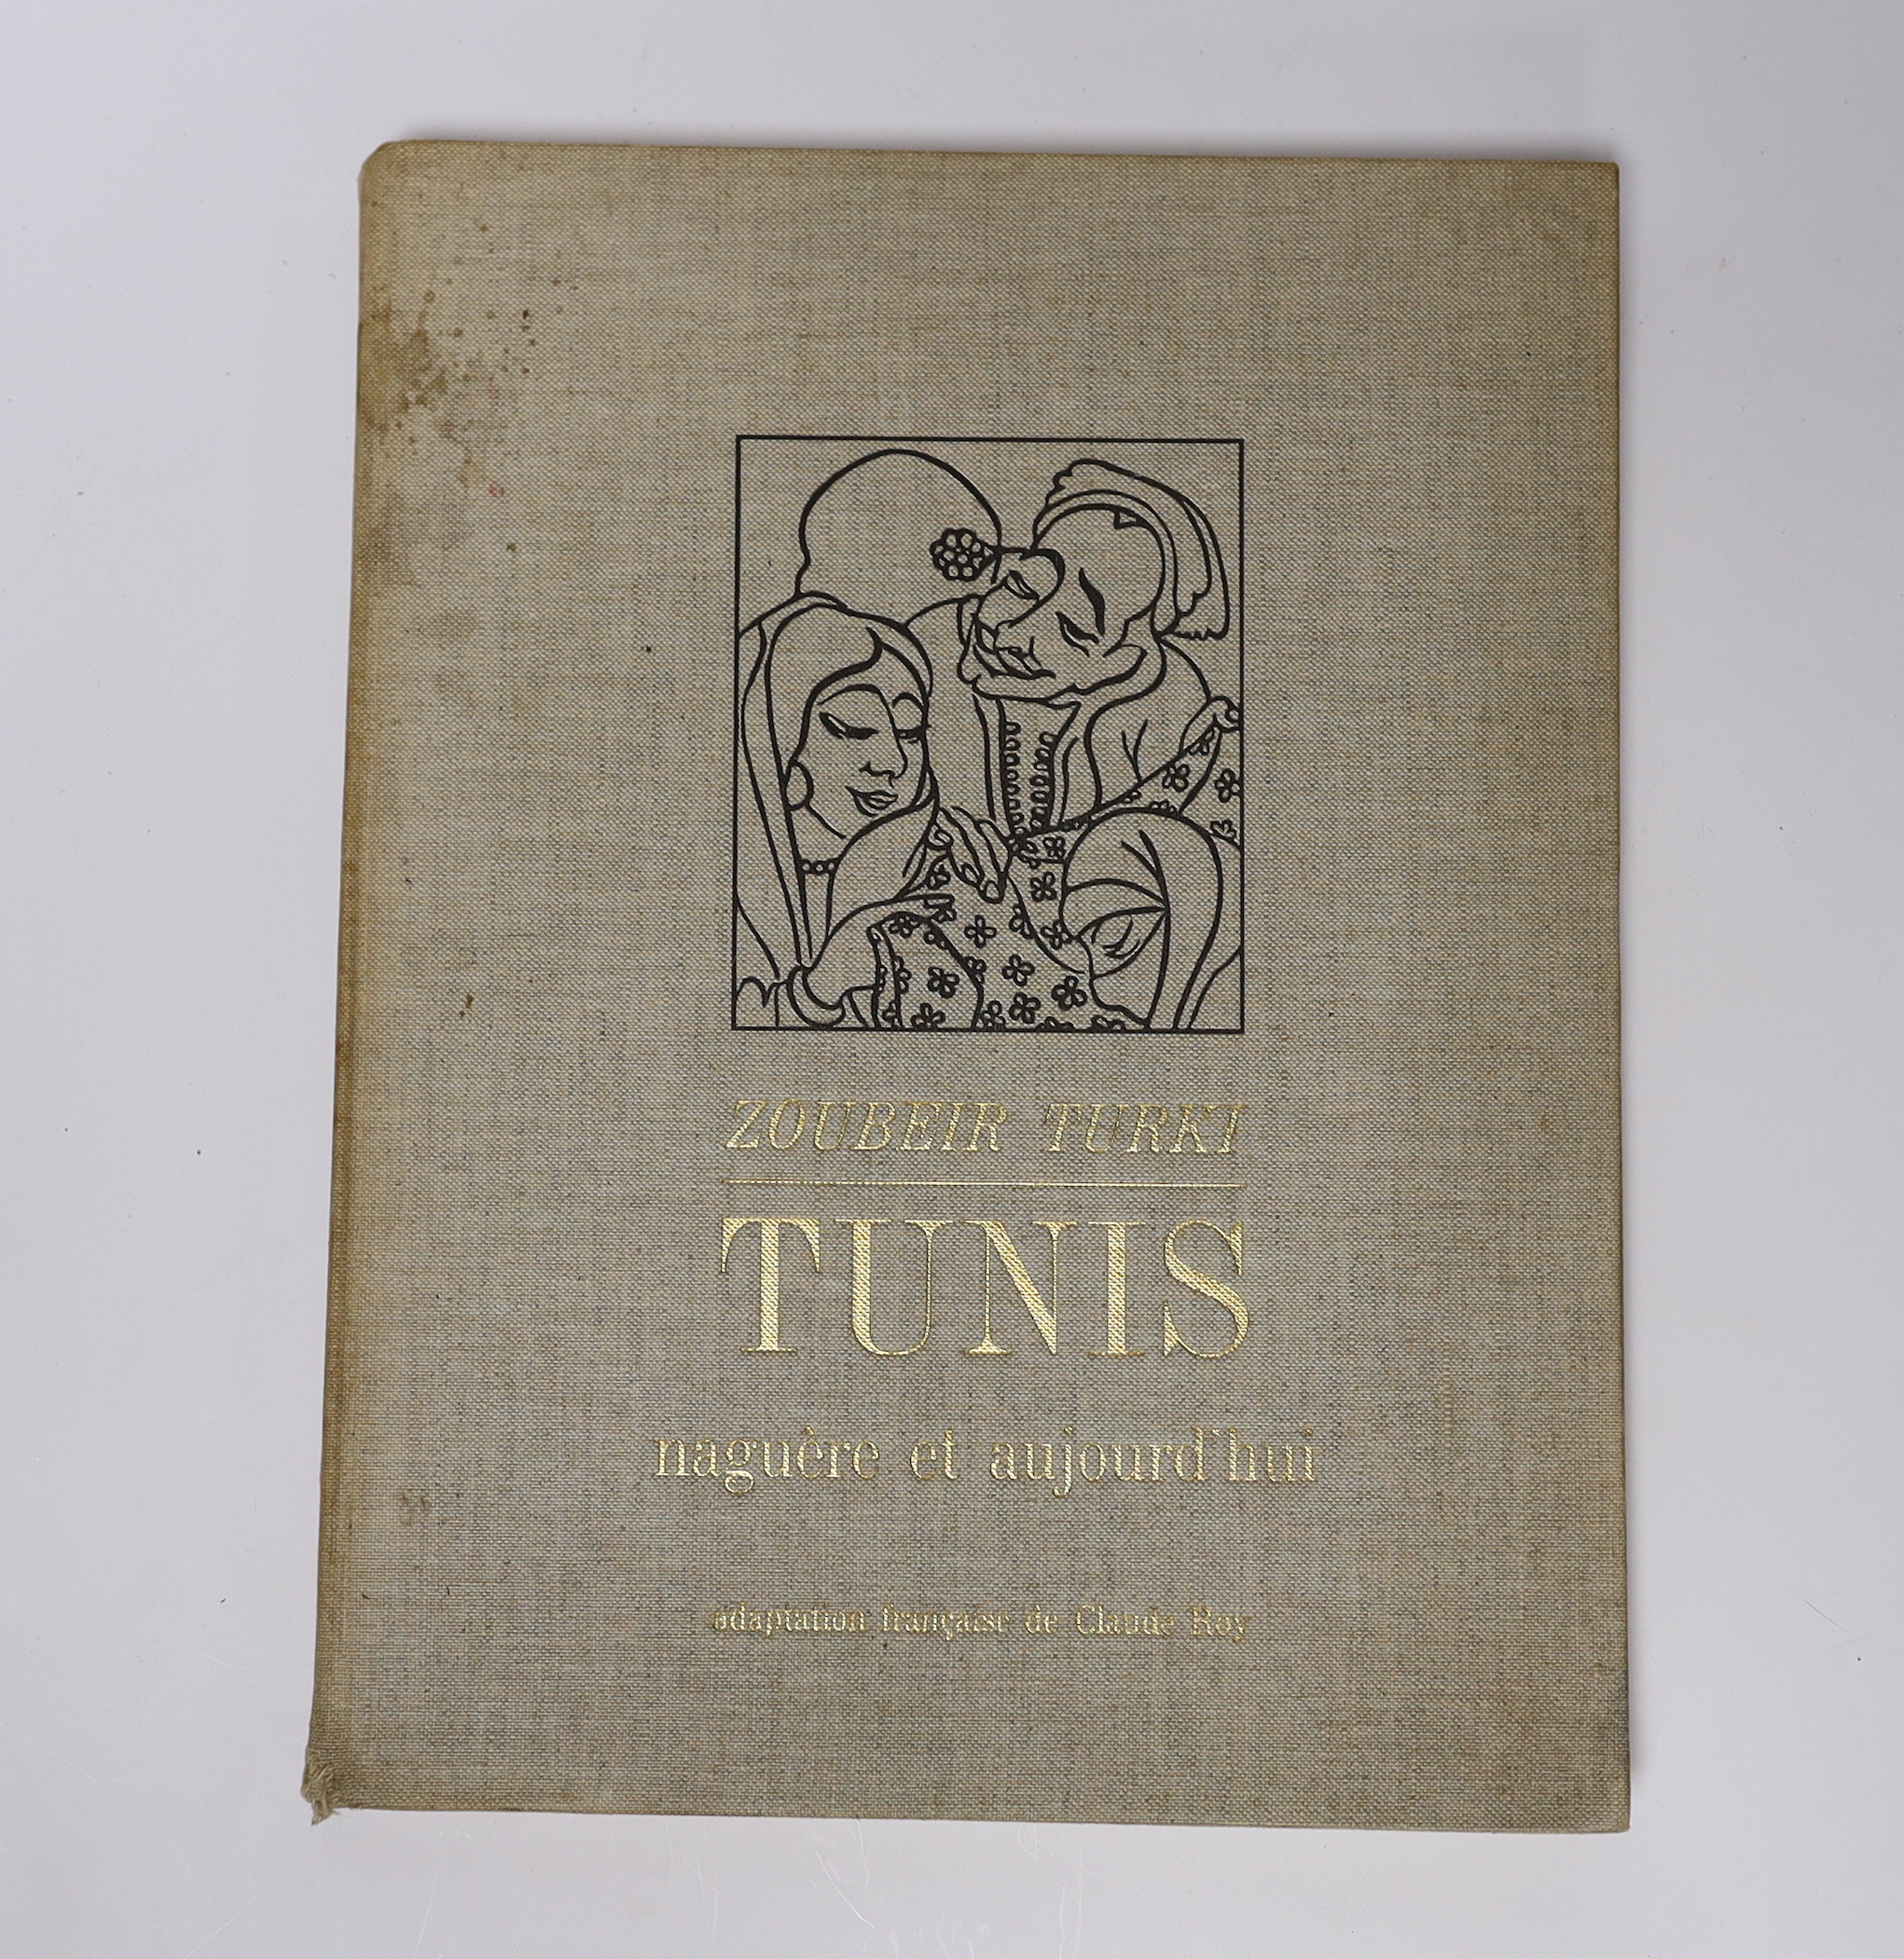 Bindings: Tagore, Rabindranath - Gitanjali (Song Offerings): a collection of prose translations....from the original Bengali. With an introduction by W.B. Yeats. port. frontis.; mid 20th cent. blind decorated and lettere